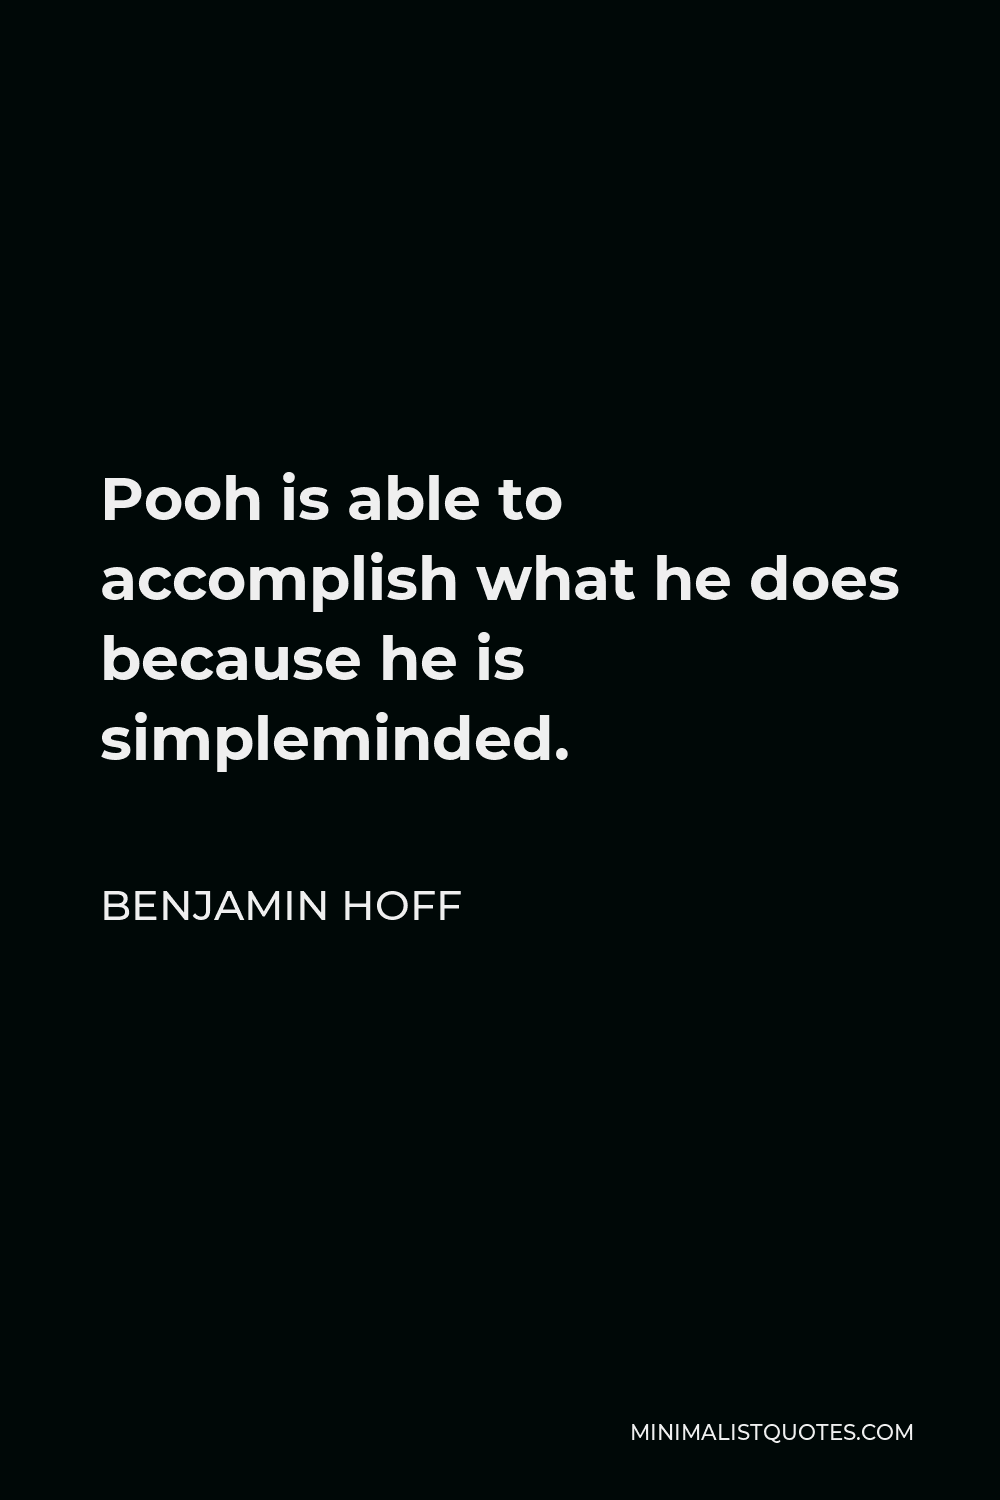 Benjamin Hoff Quote - Pooh is able to accomplish what he does because he is simpleminded.